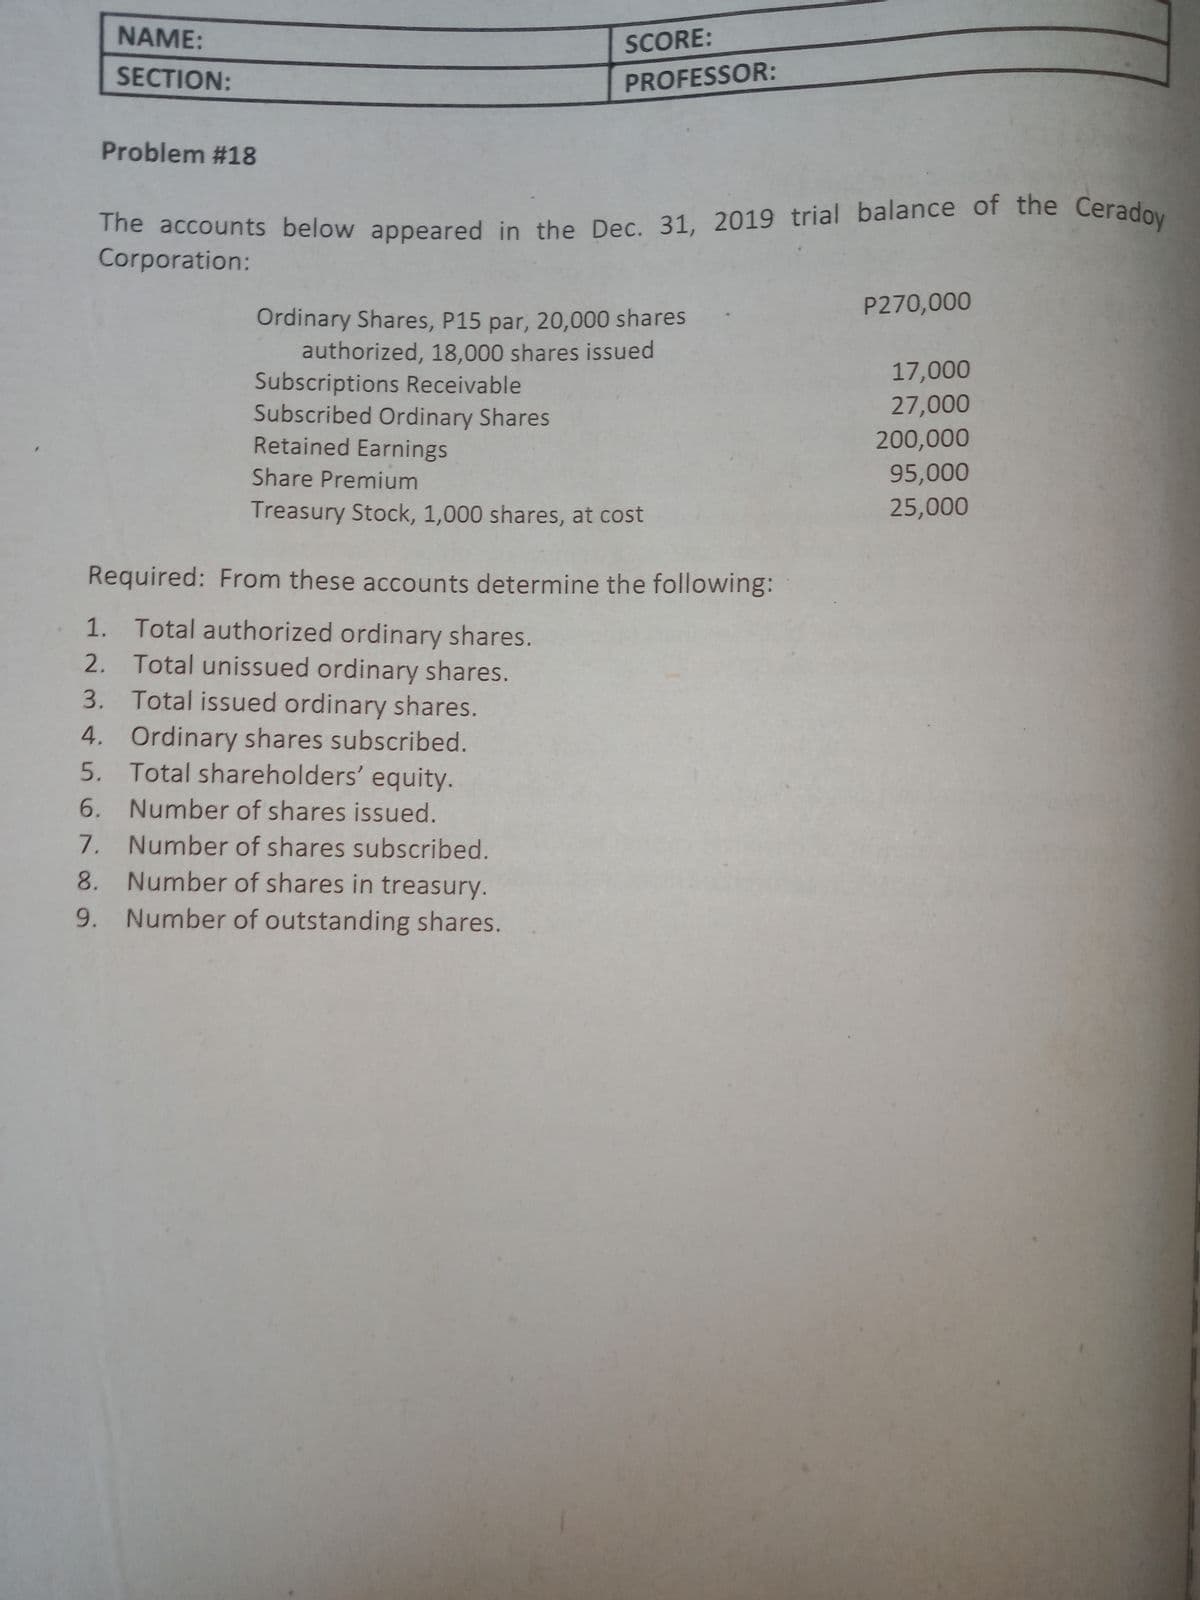 The accounts below appeared in the Dec. 31, 2019 trial balance of the Ceradoy
NAME:
SCORE:
SECTION:
PROFESSOR:
Problem #18
Corporation:
P270,000
Ordinary Shares, P15 par, 20,000 shares
authorized, 18,000 shares issued
Subscriptions Receivable
Subscribed Ordinary Shares
Retained Earnings
17,000
27,000
200,000
Share Premium
95,000
Treasury Stock, 1,000 shares, at cost
25,000
Required: From these accounts determine the following:
1. Total authorized ordinary shares.
2. Total unissued ordinary shares.
3. Total issued ordinary shares.
4. Ordinary shares subscribed.
5. Total shareholders' equity.
6. Number of shares issued.
7. Number of shares subscribed.
8. Number of shares in treasury.
9. Number of outstanding shares.
